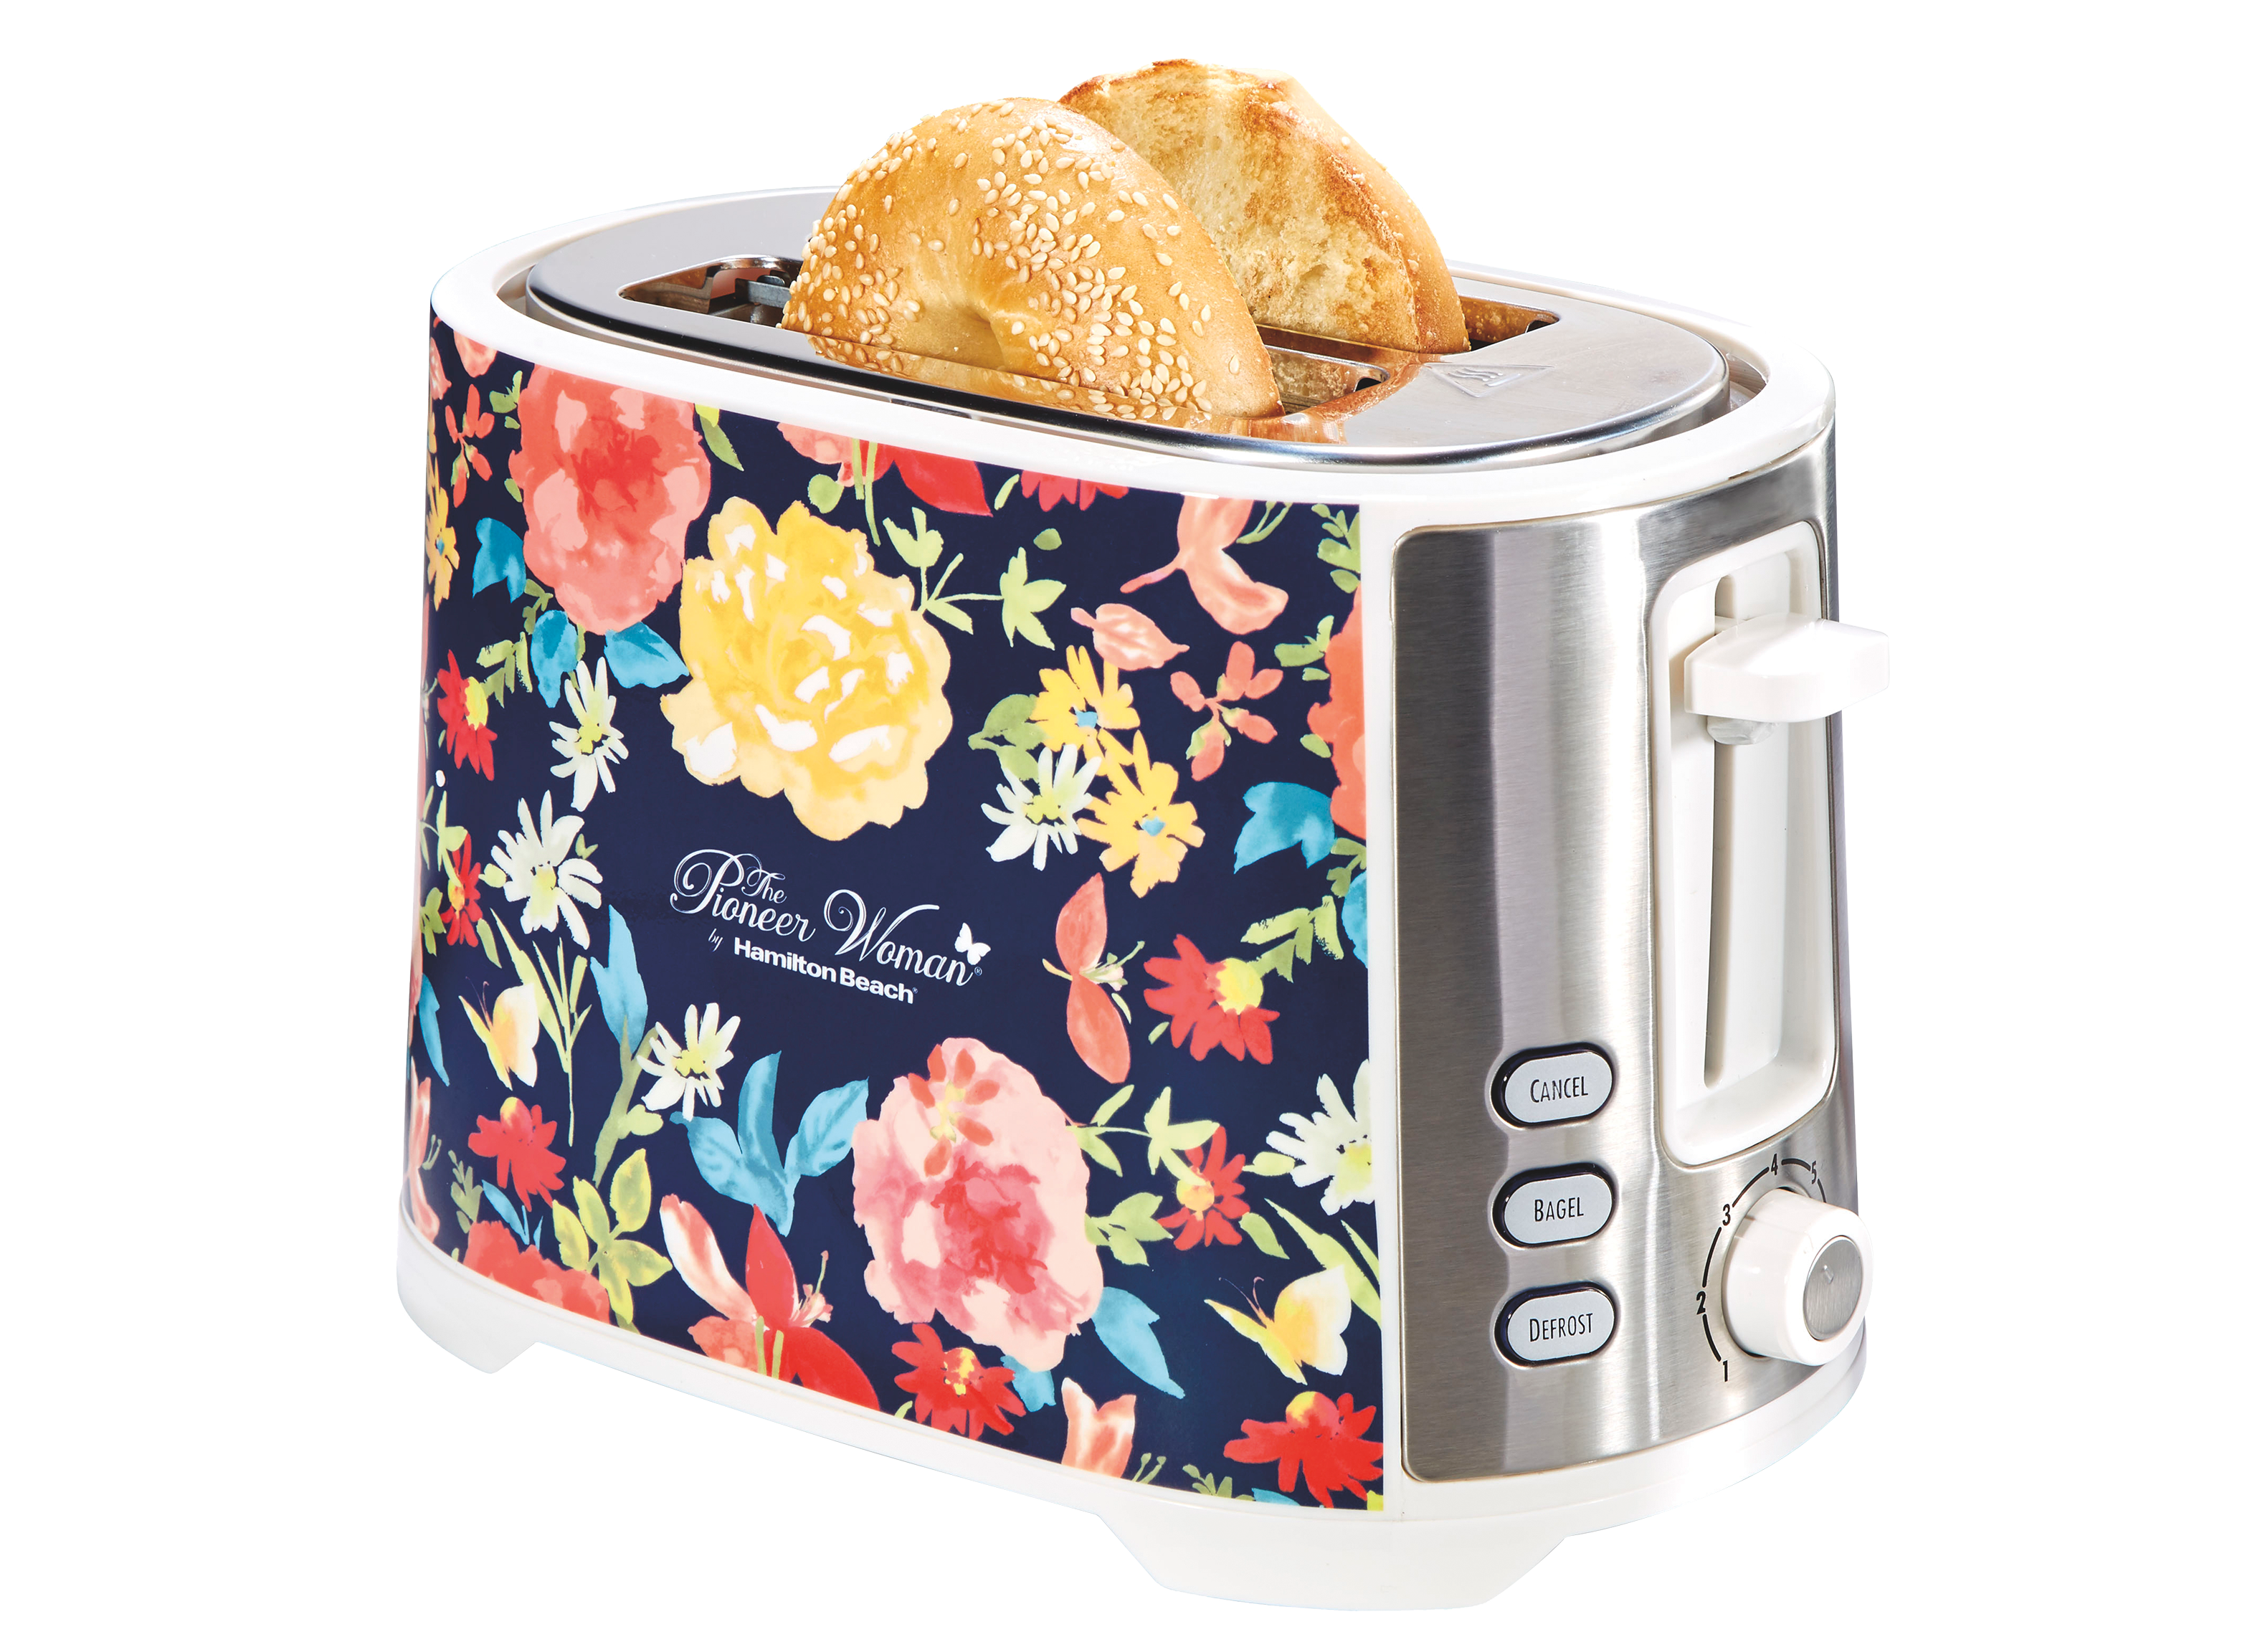 Pioneer Woman Fiona Floral 22638 by Hamilton Beach 2-Slice Toaster